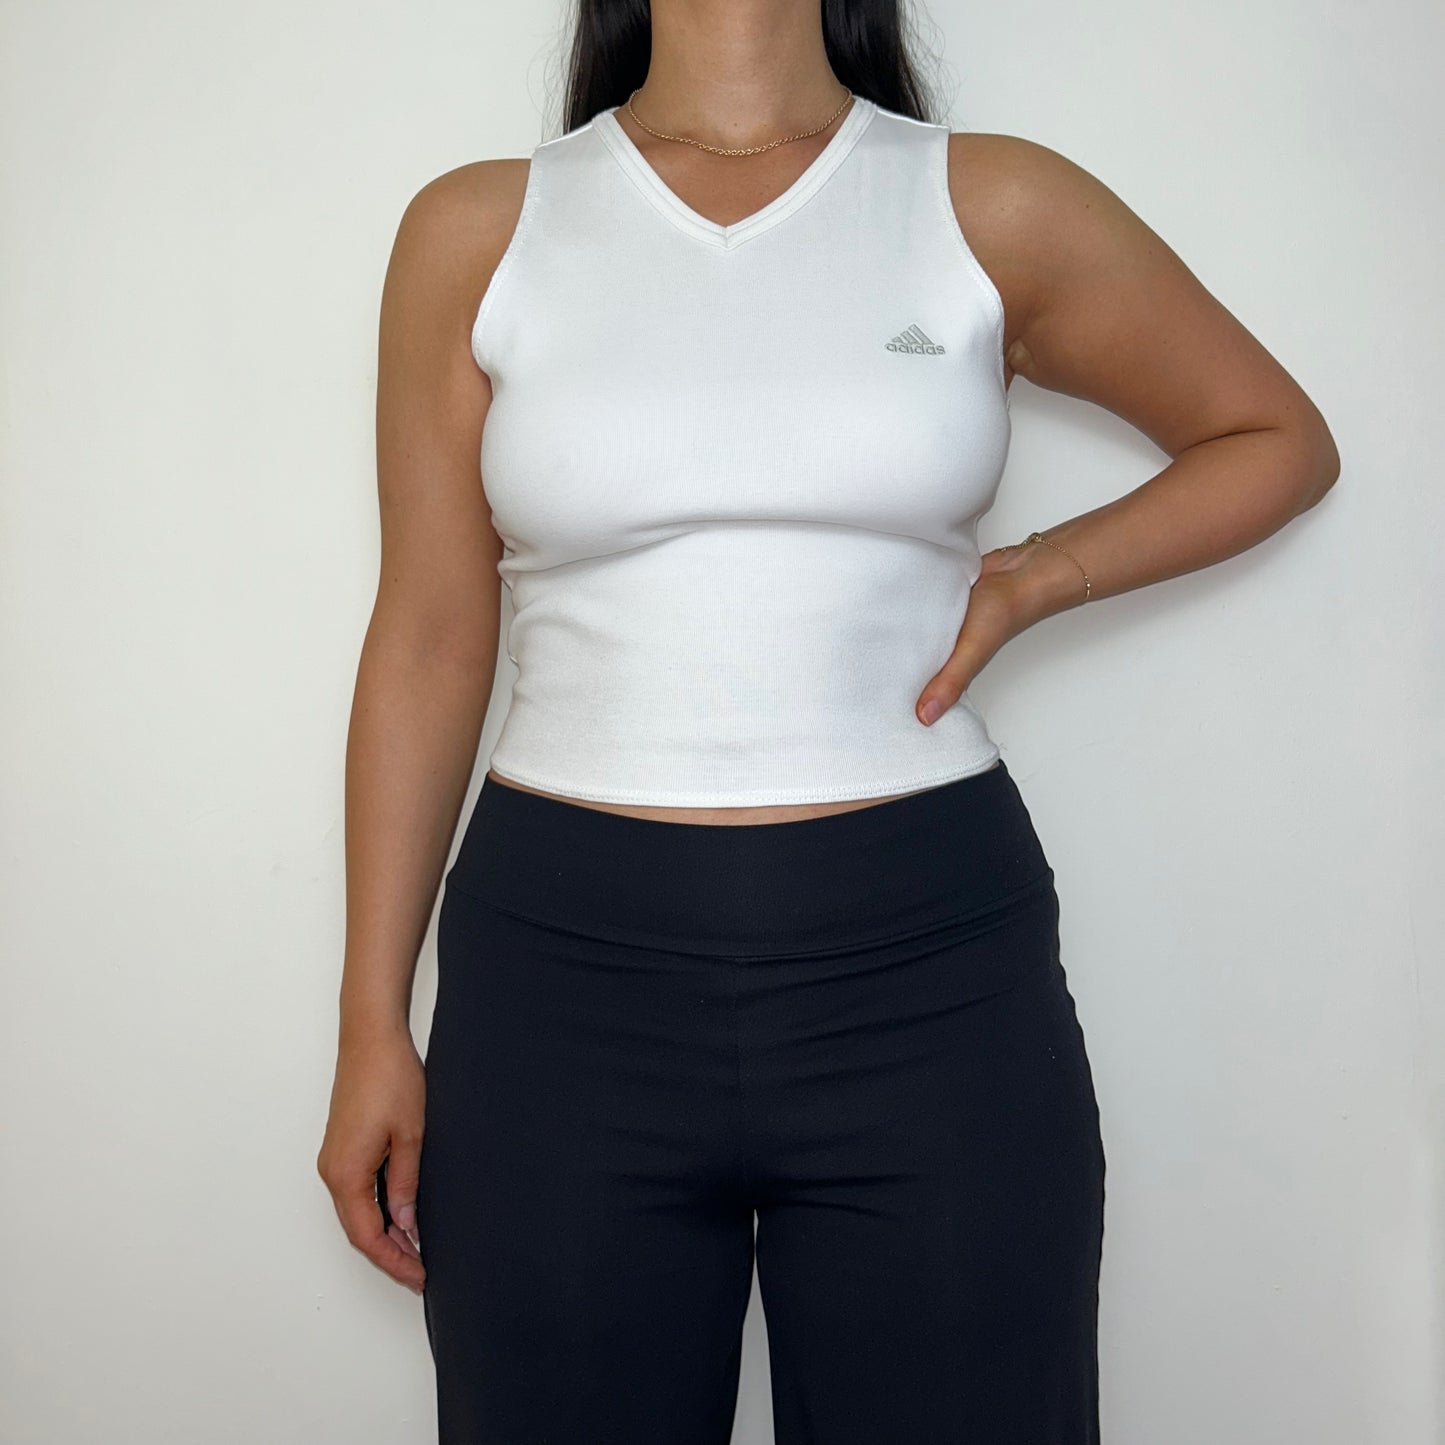 white sleeveless crop top with grey adidas logo shown on a model wearing black trousers